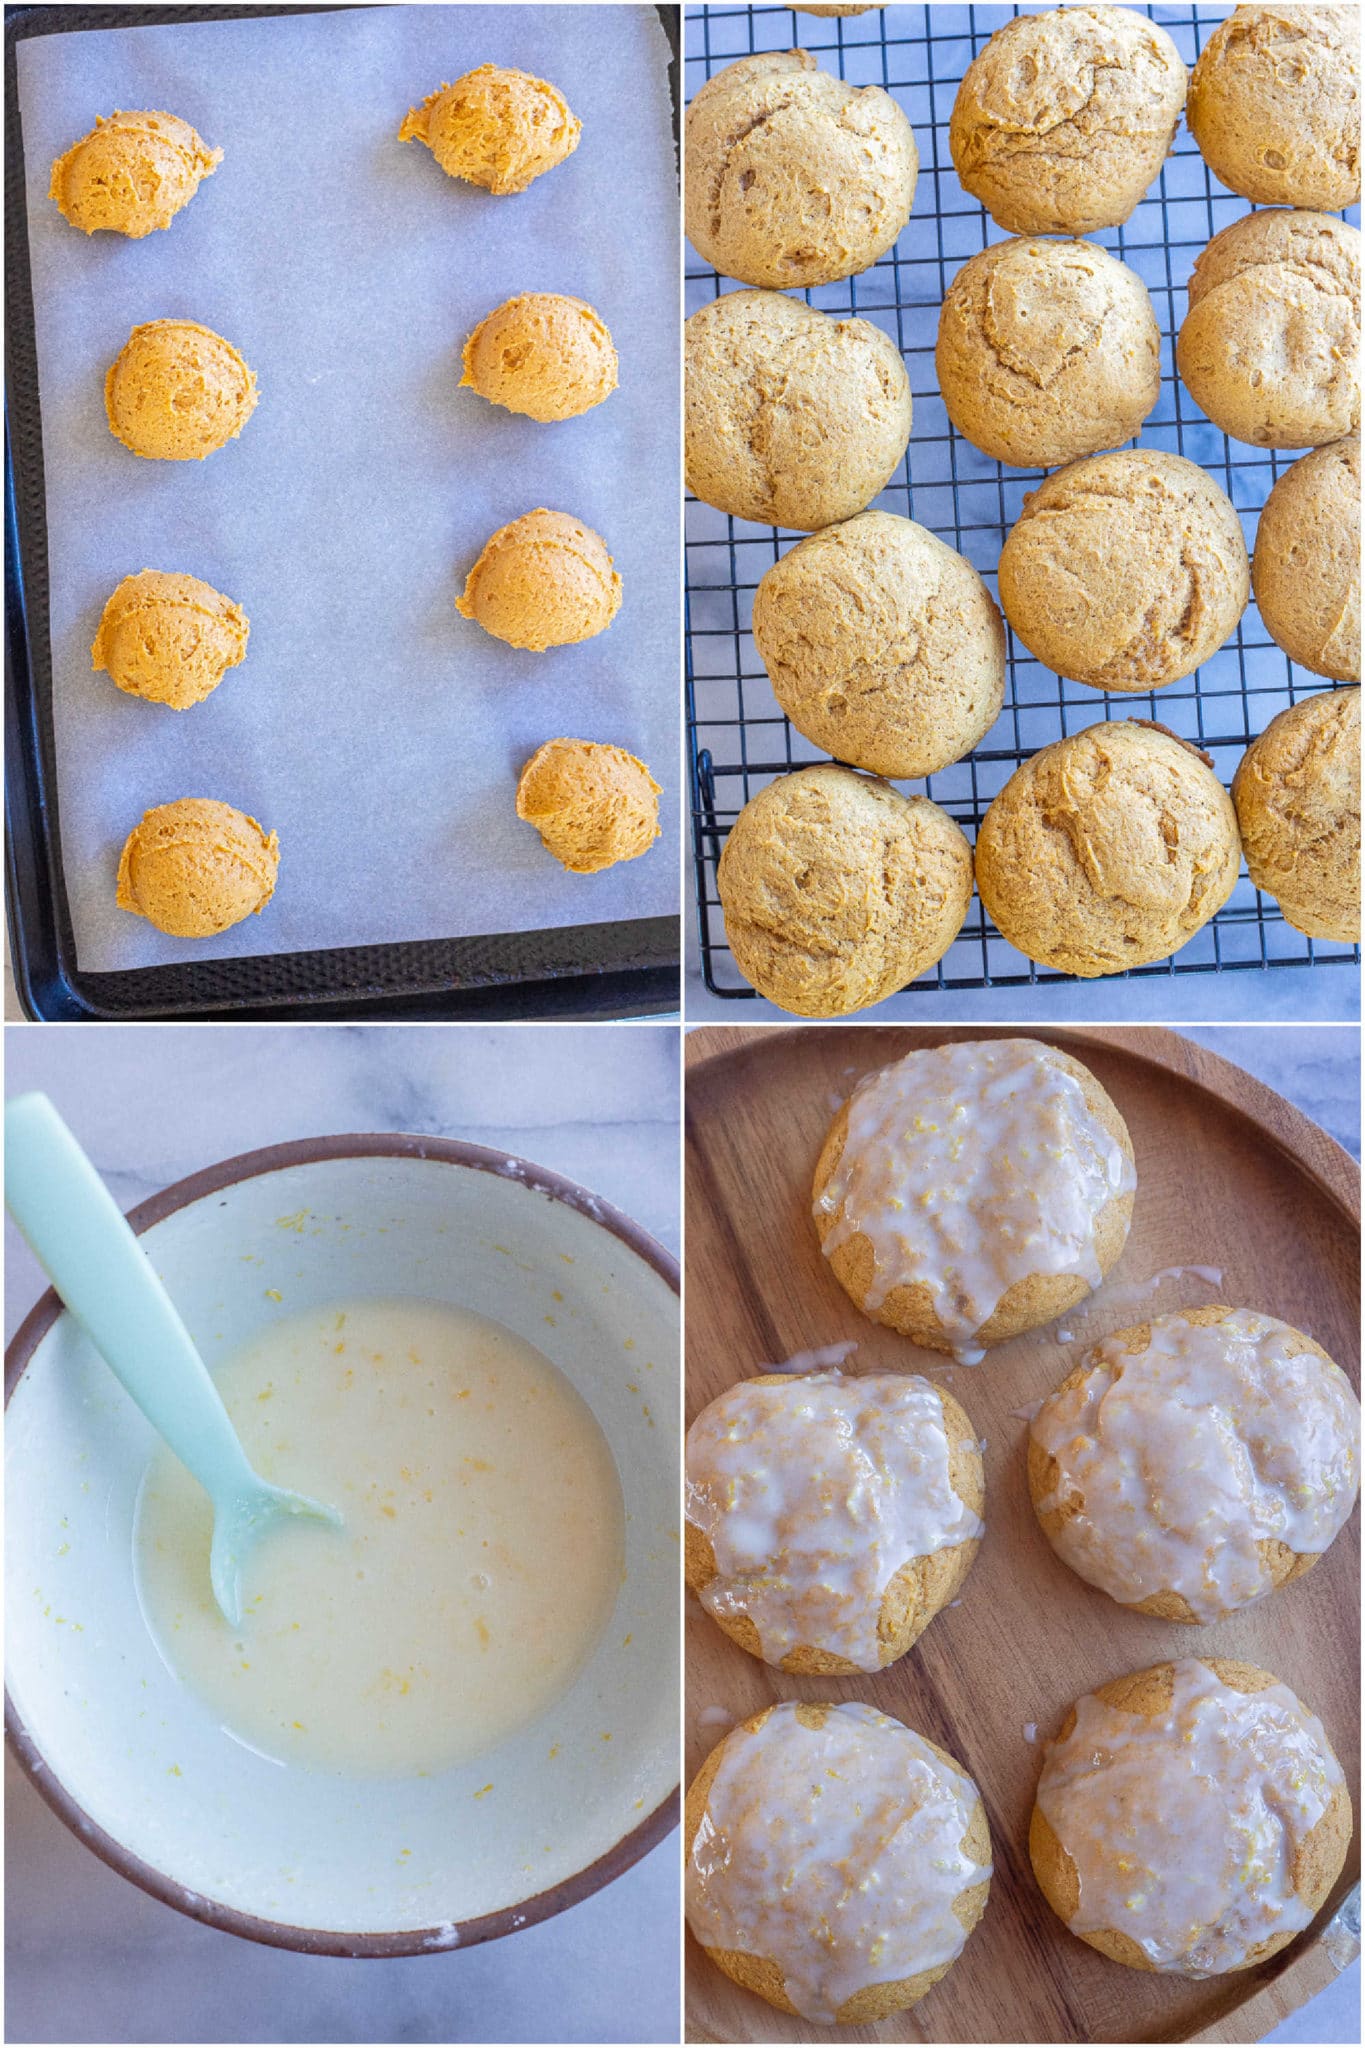 soft pumpkin cookies before and after they've been baked and the orange glaze recipe for the cookies